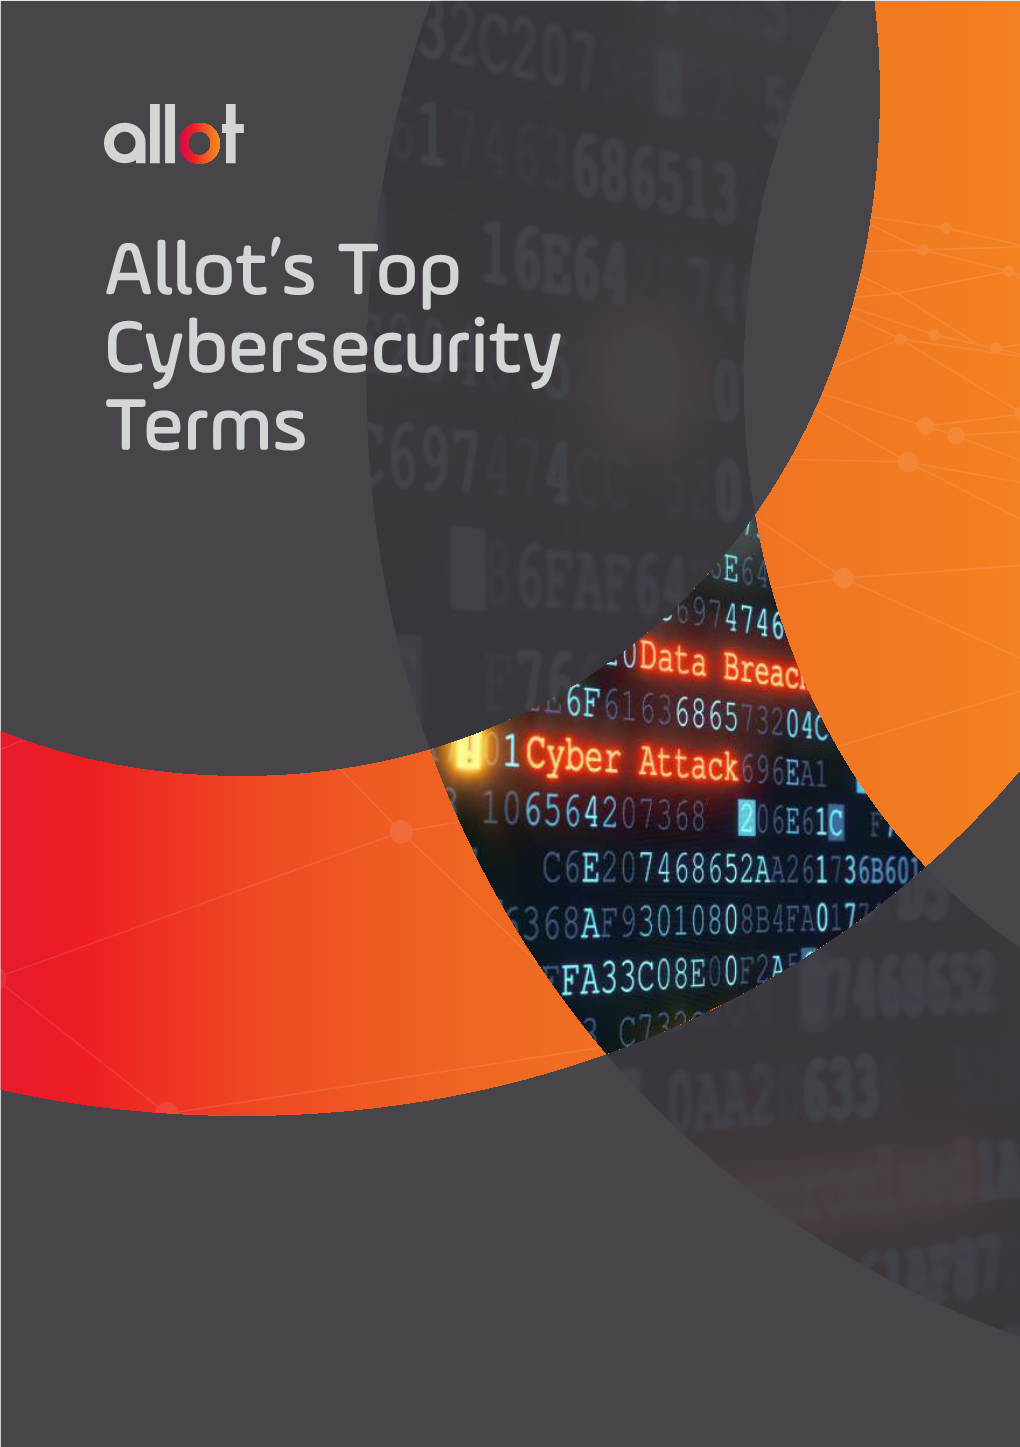 Allot's Top Cybersecurity Terms Provides a Comprehensive List of the Industry’S Significant Cybersecurity Terms and Definitions